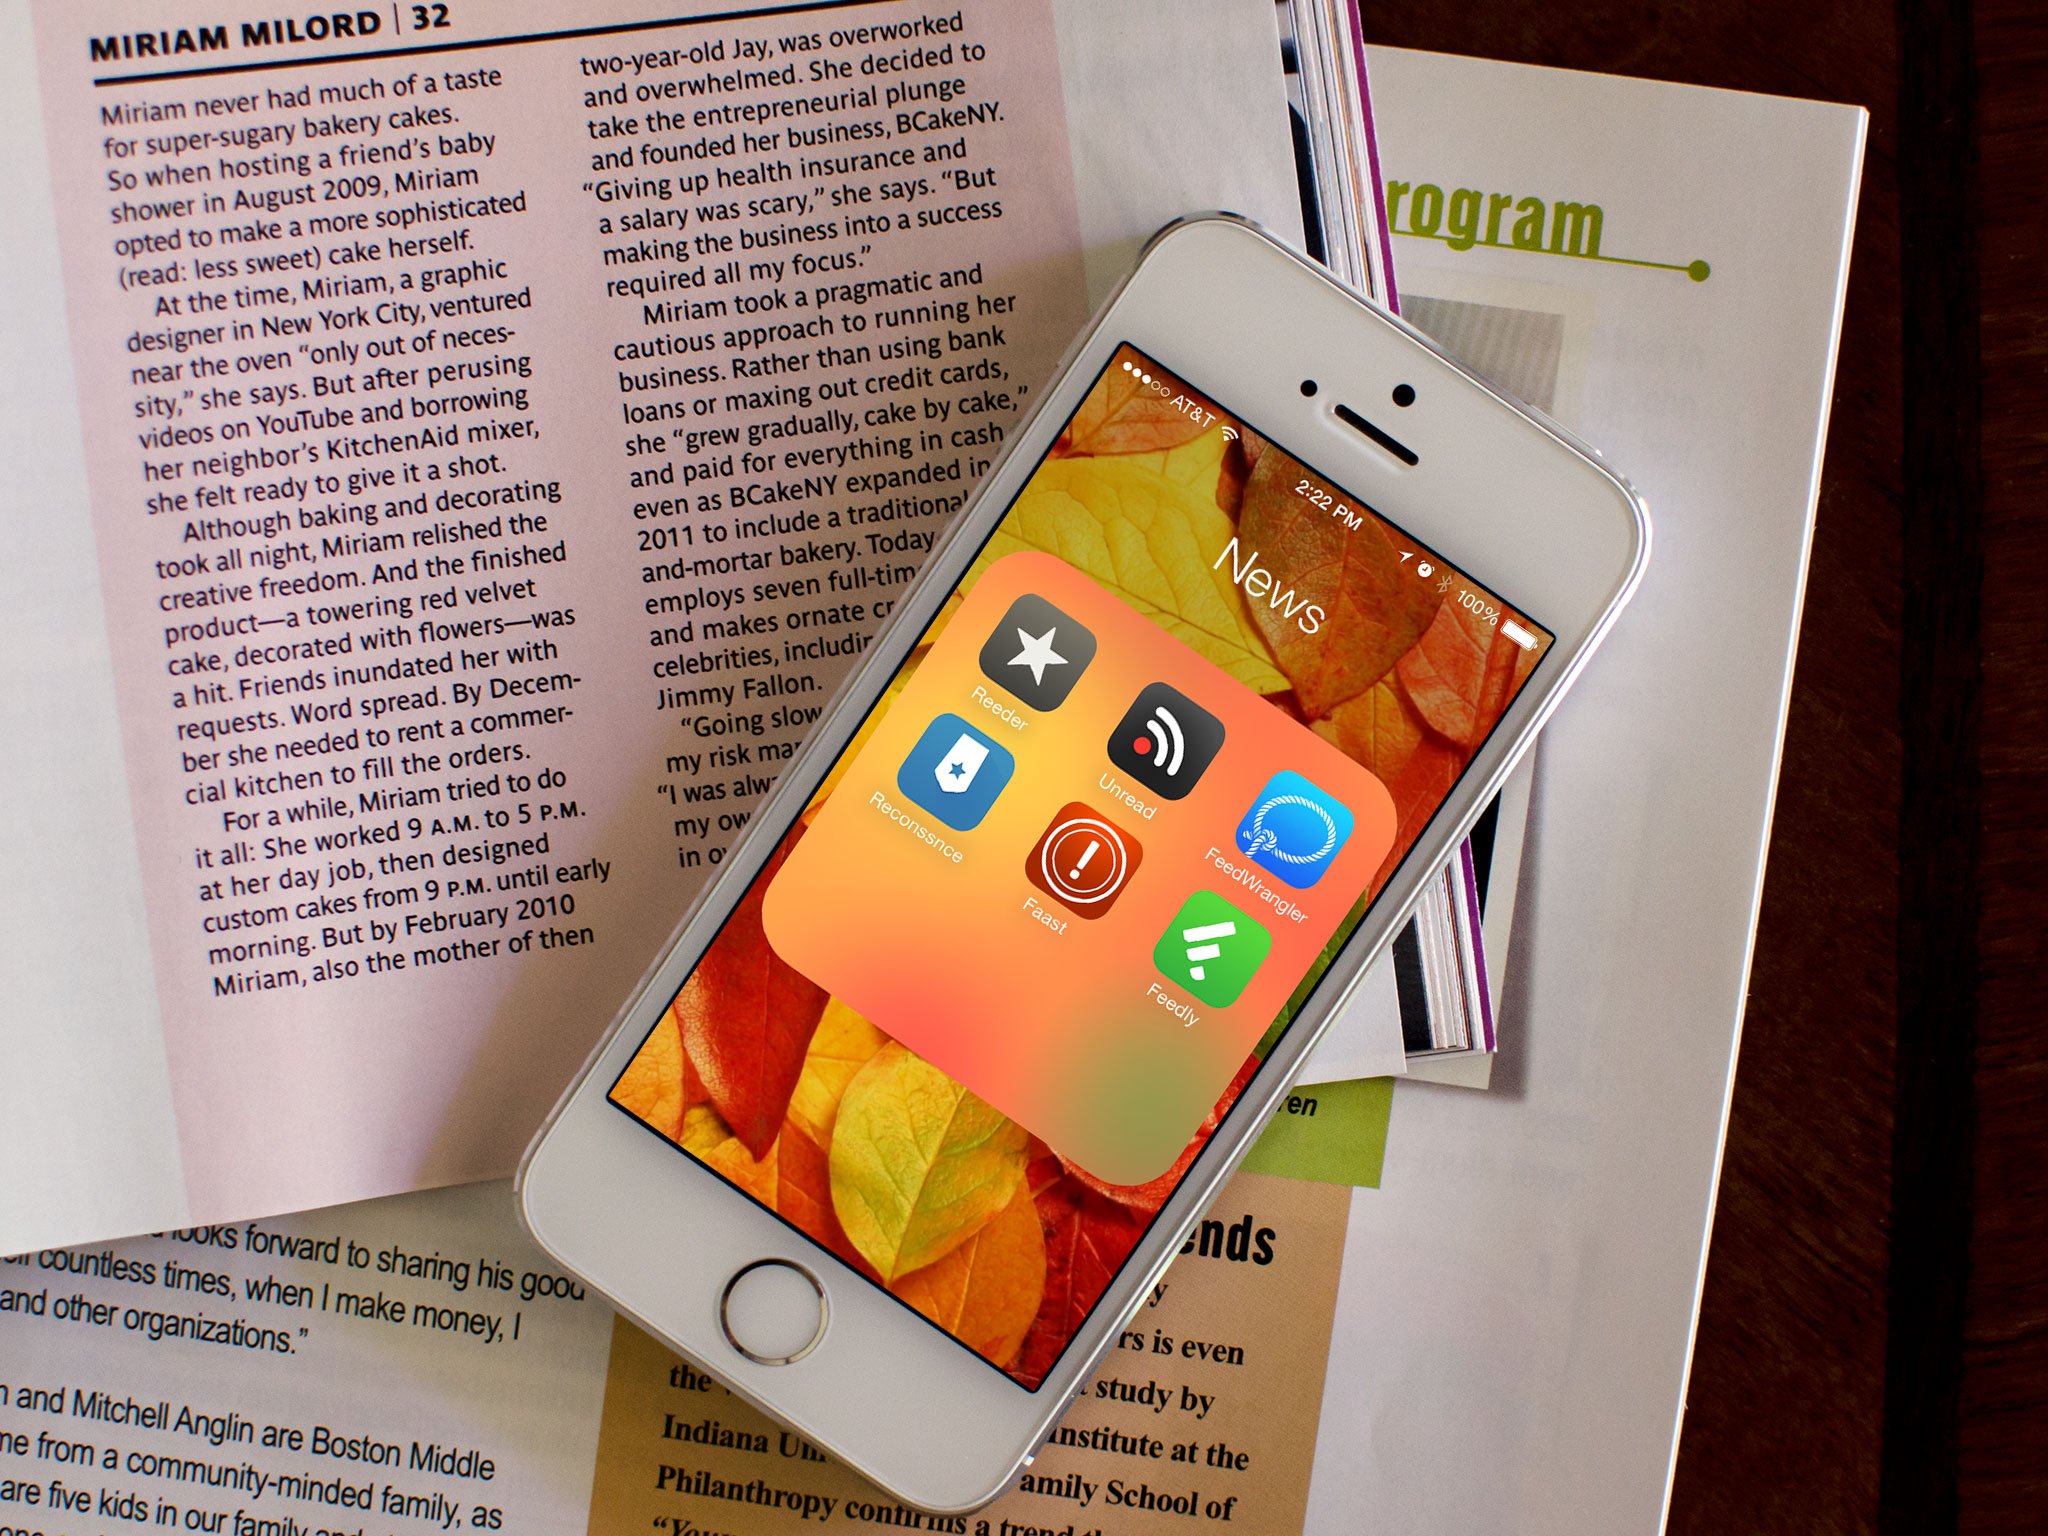 Best news and RSS apps for iPhone: Stay current with the news you care about most